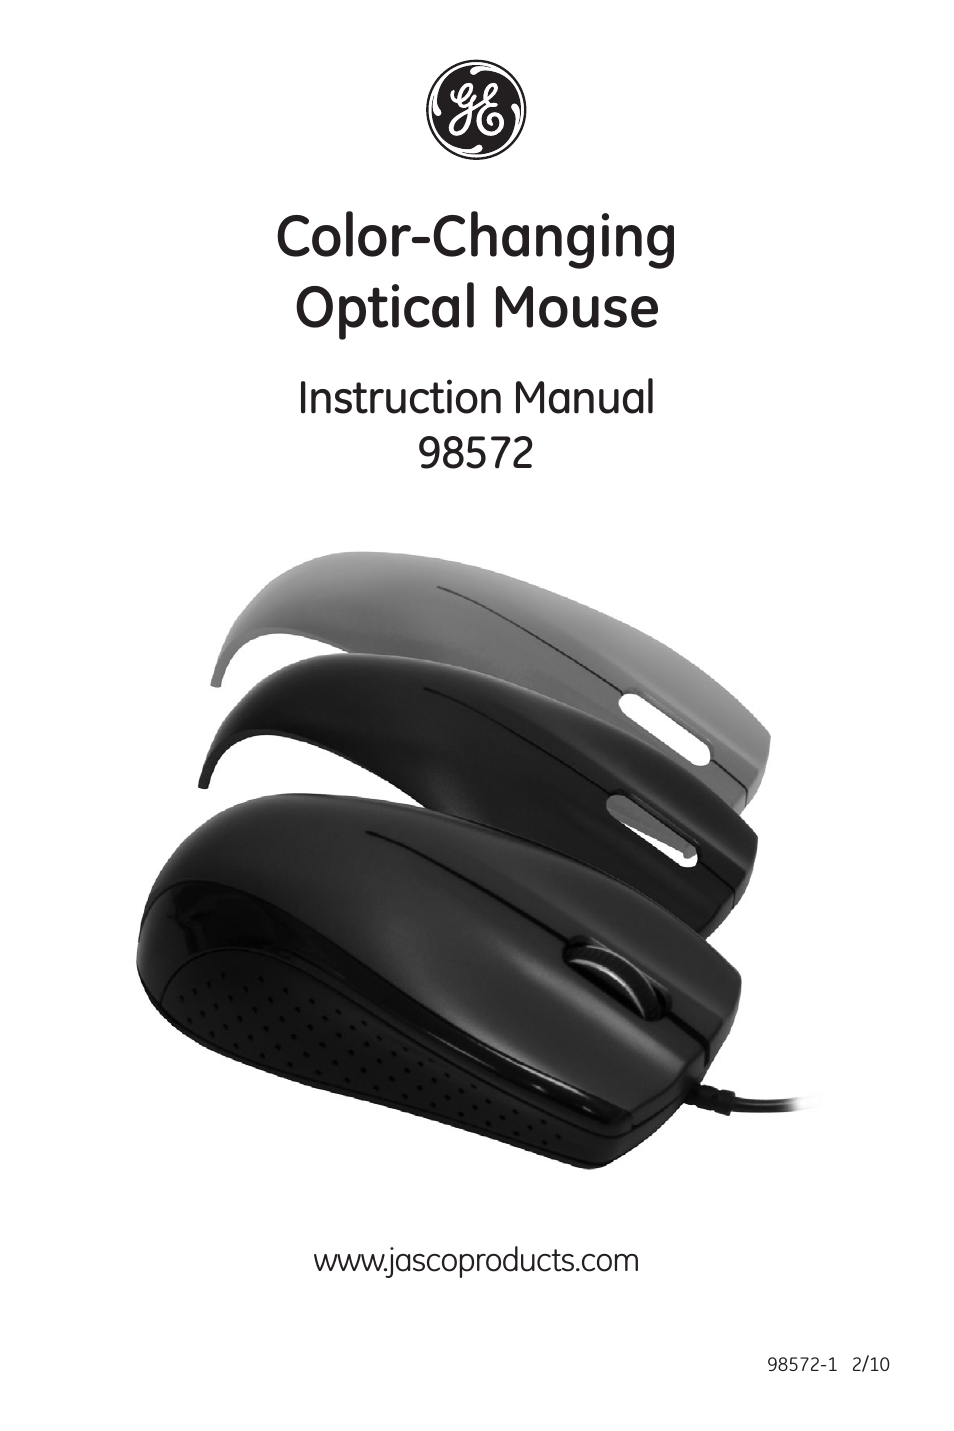 98572 GE Color-Changing Optical Mouse